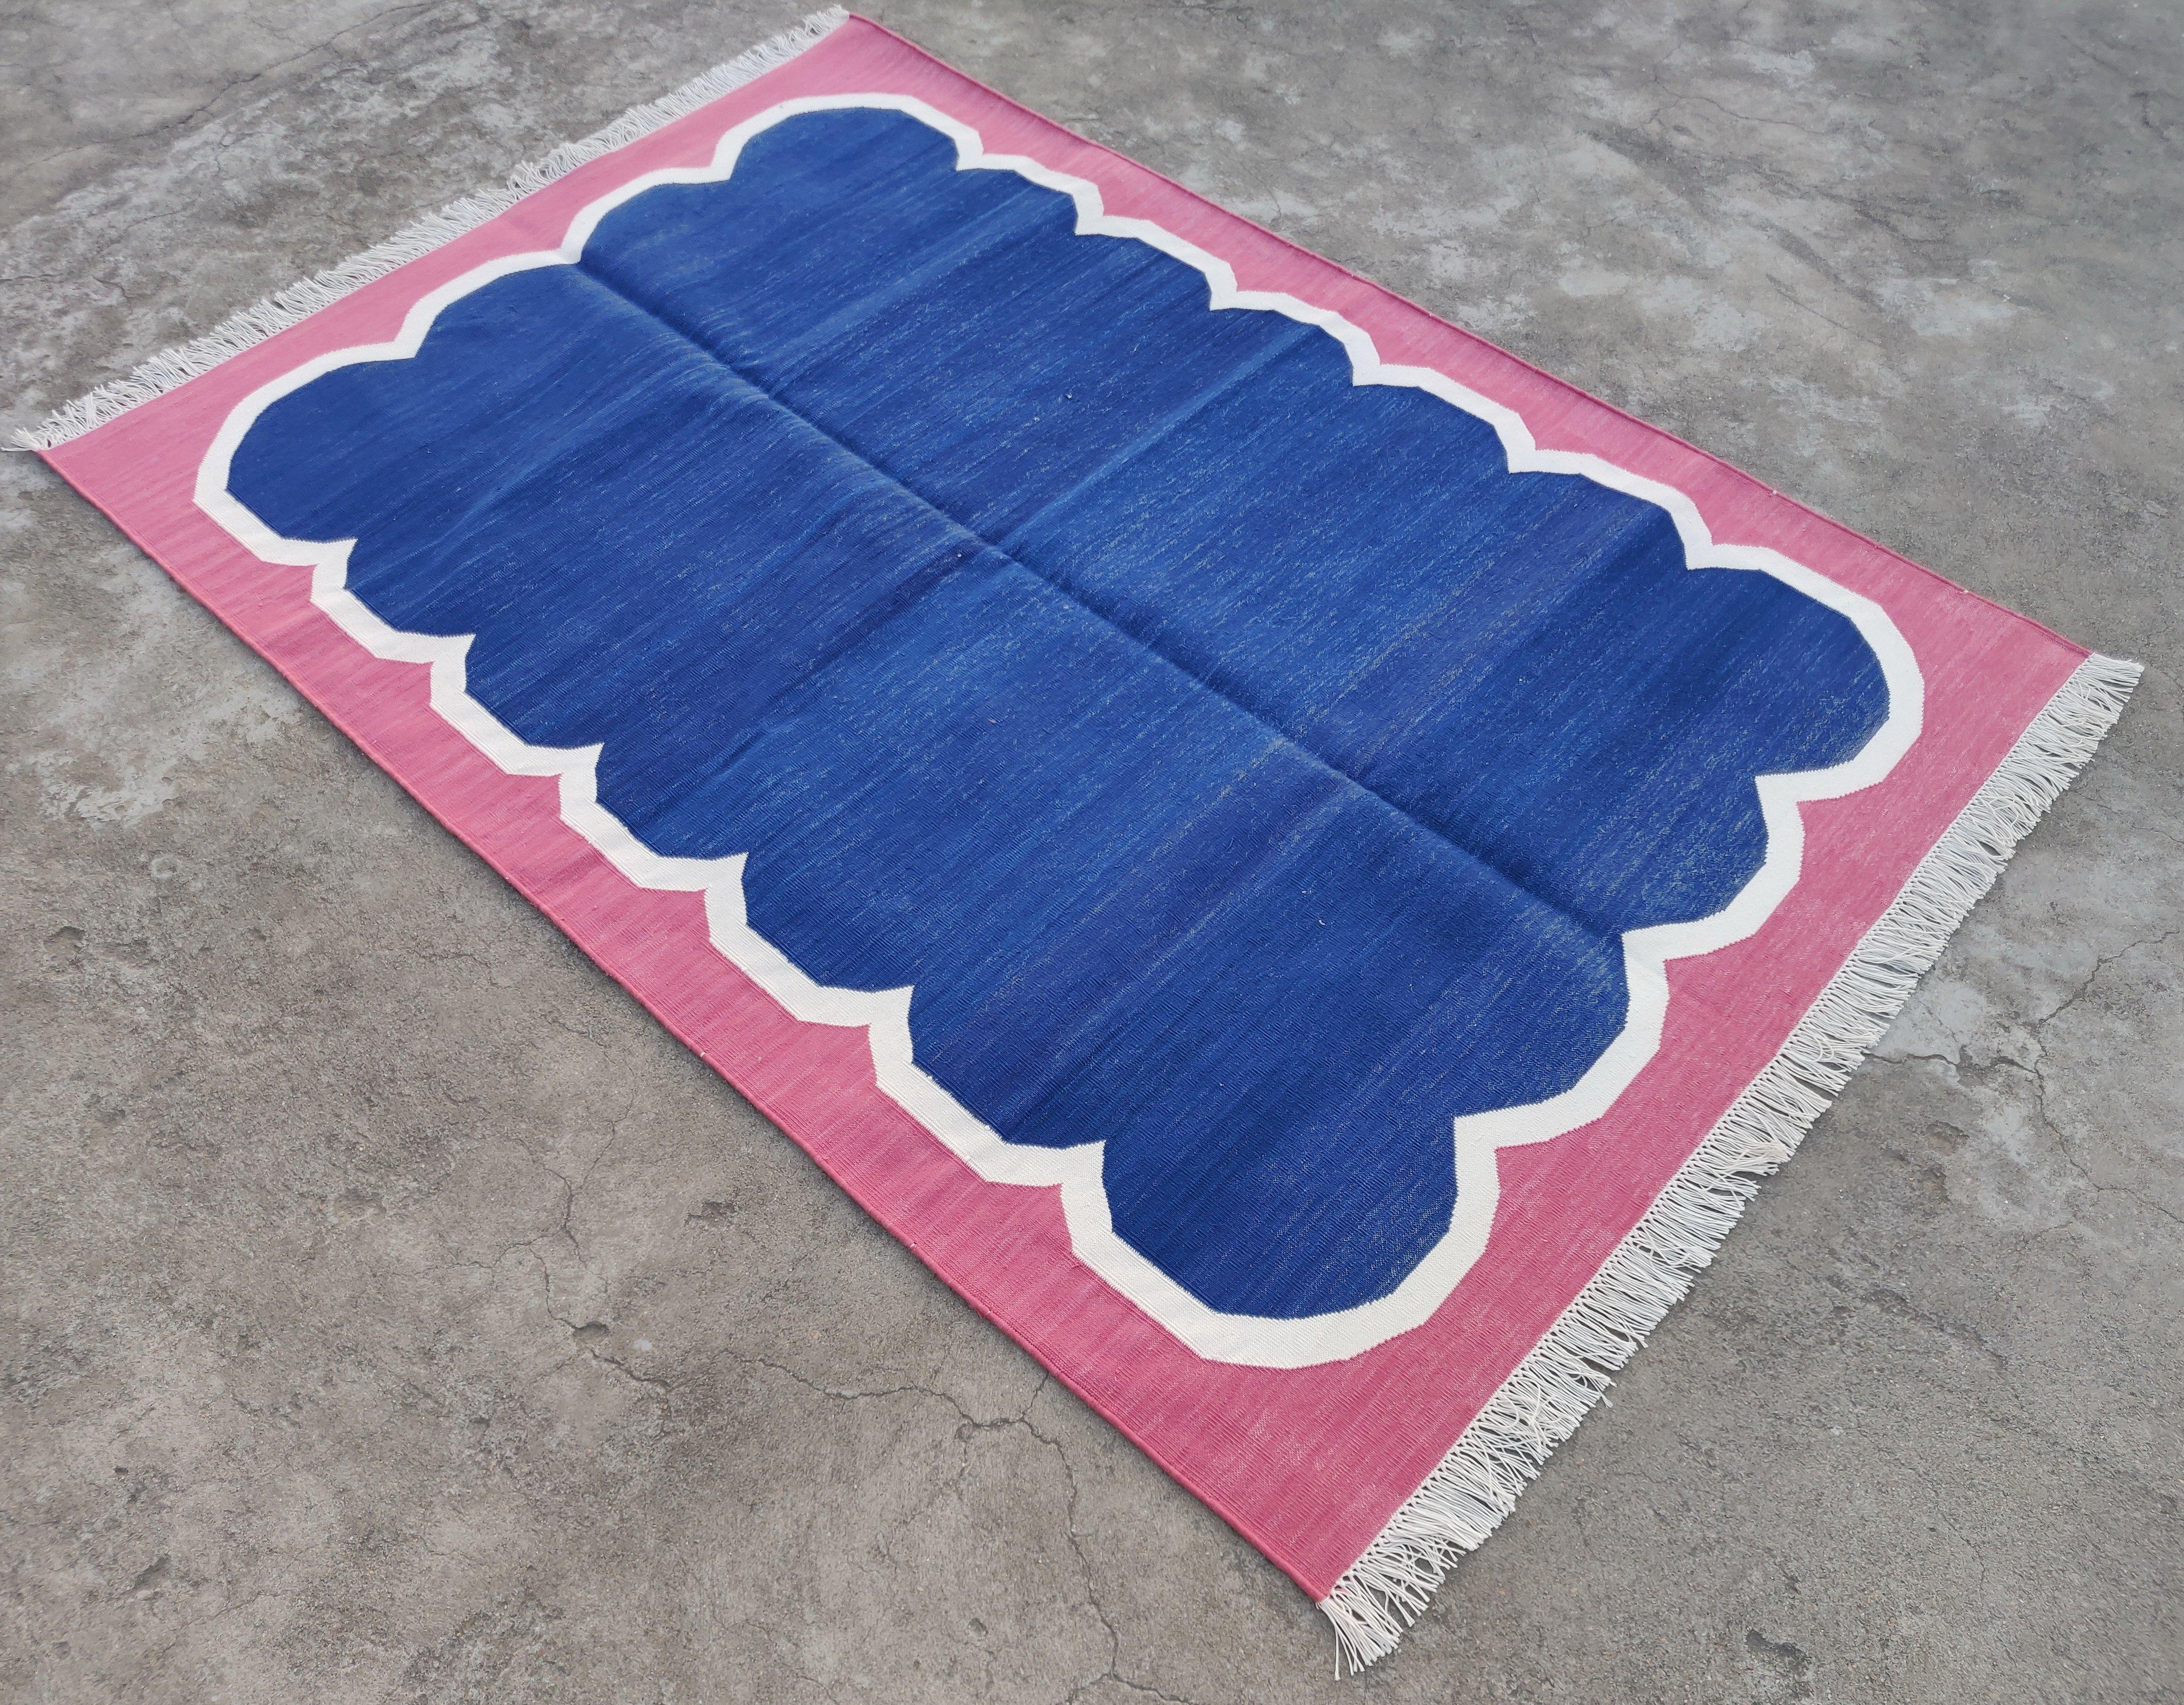 Cotton Vegetable Dyed Navy Blue and Pink Scalloped Striped Indian Dhurrie Rug-4'x6' 

These special flat-weave dhurries are hand-woven with 15 ply 100% cotton yarn. Due to the special manufacturing techniques used to create our rugs, the size and